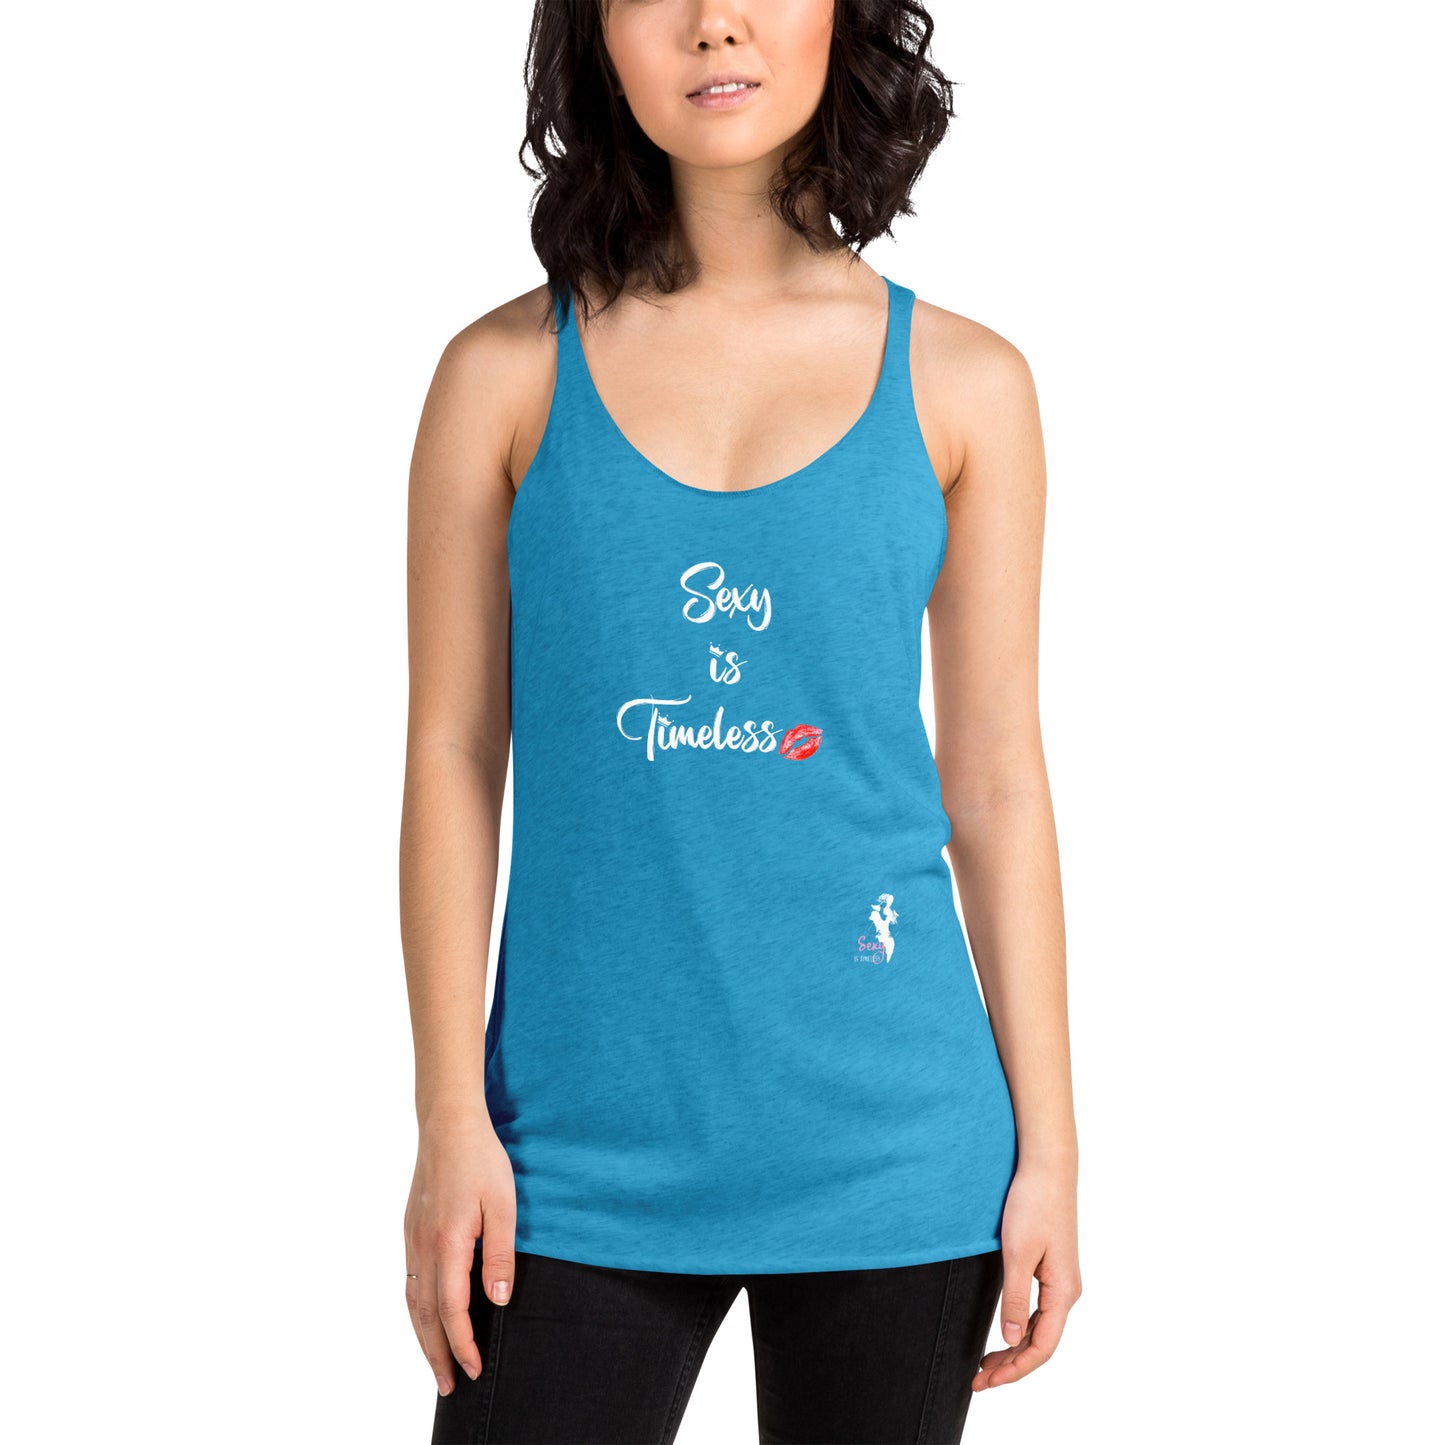 Women's Racerback Tank - Sexy is Timeless - Colors